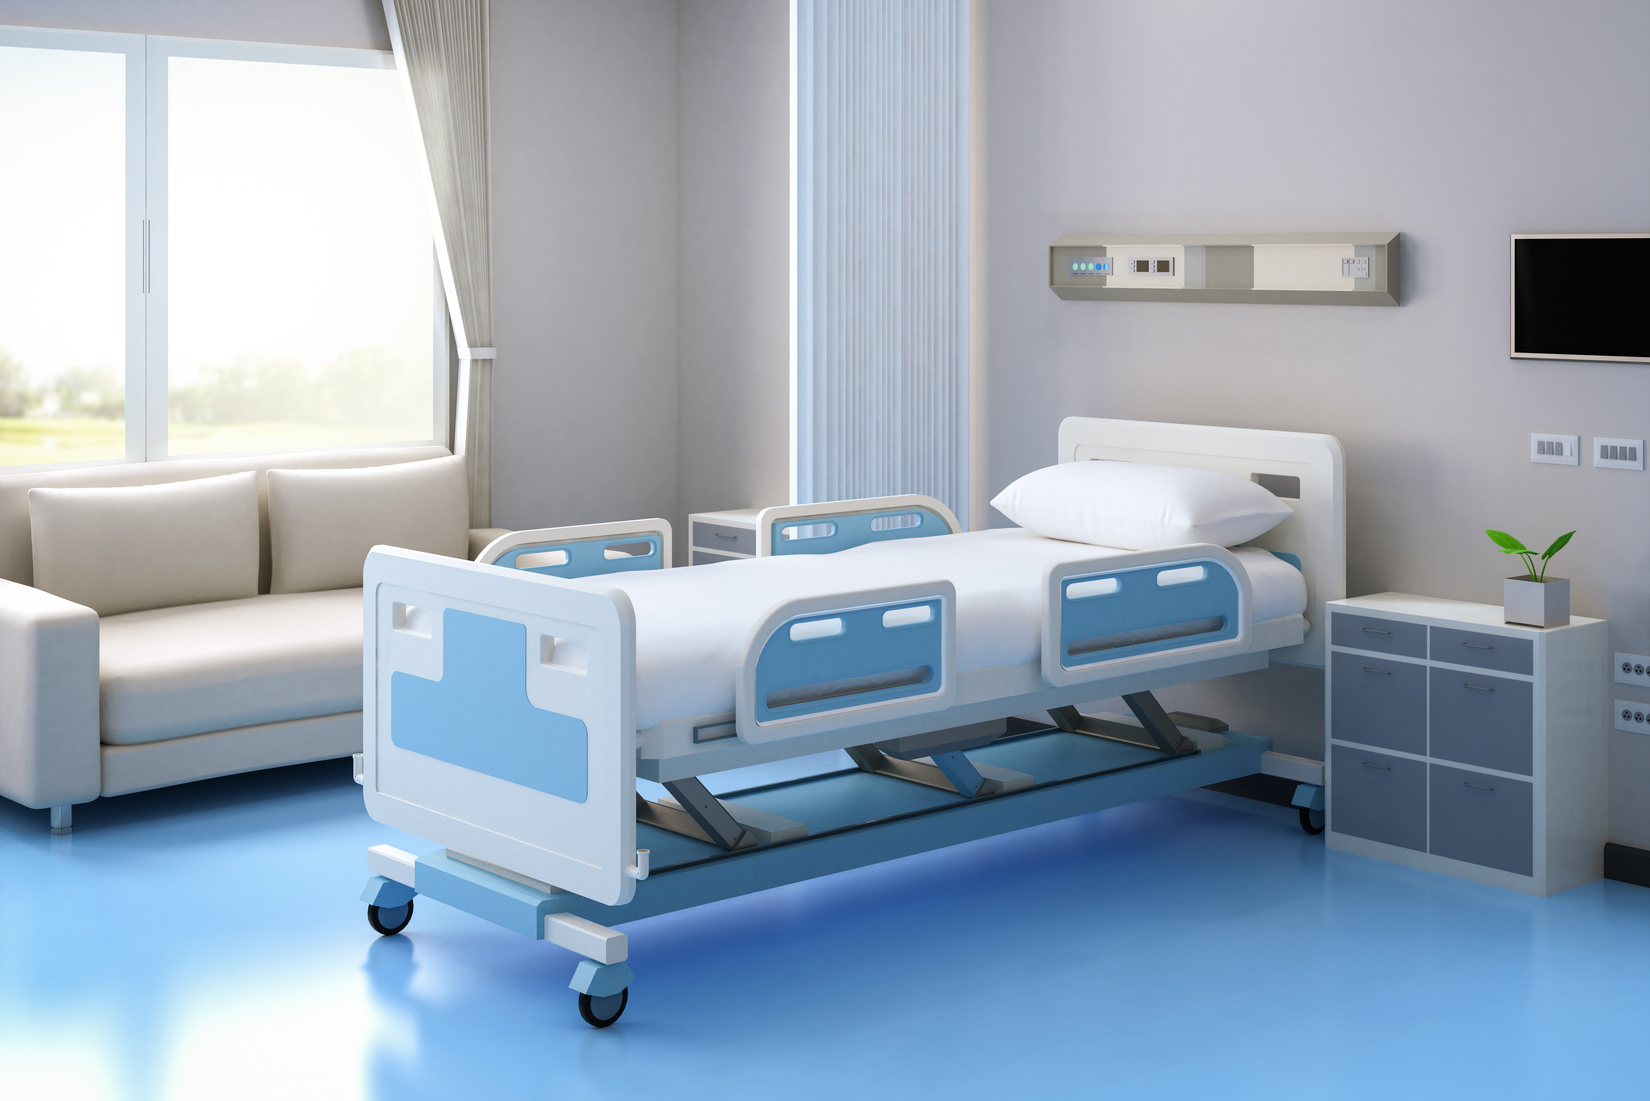 hospital interior in recovery or inpatient room